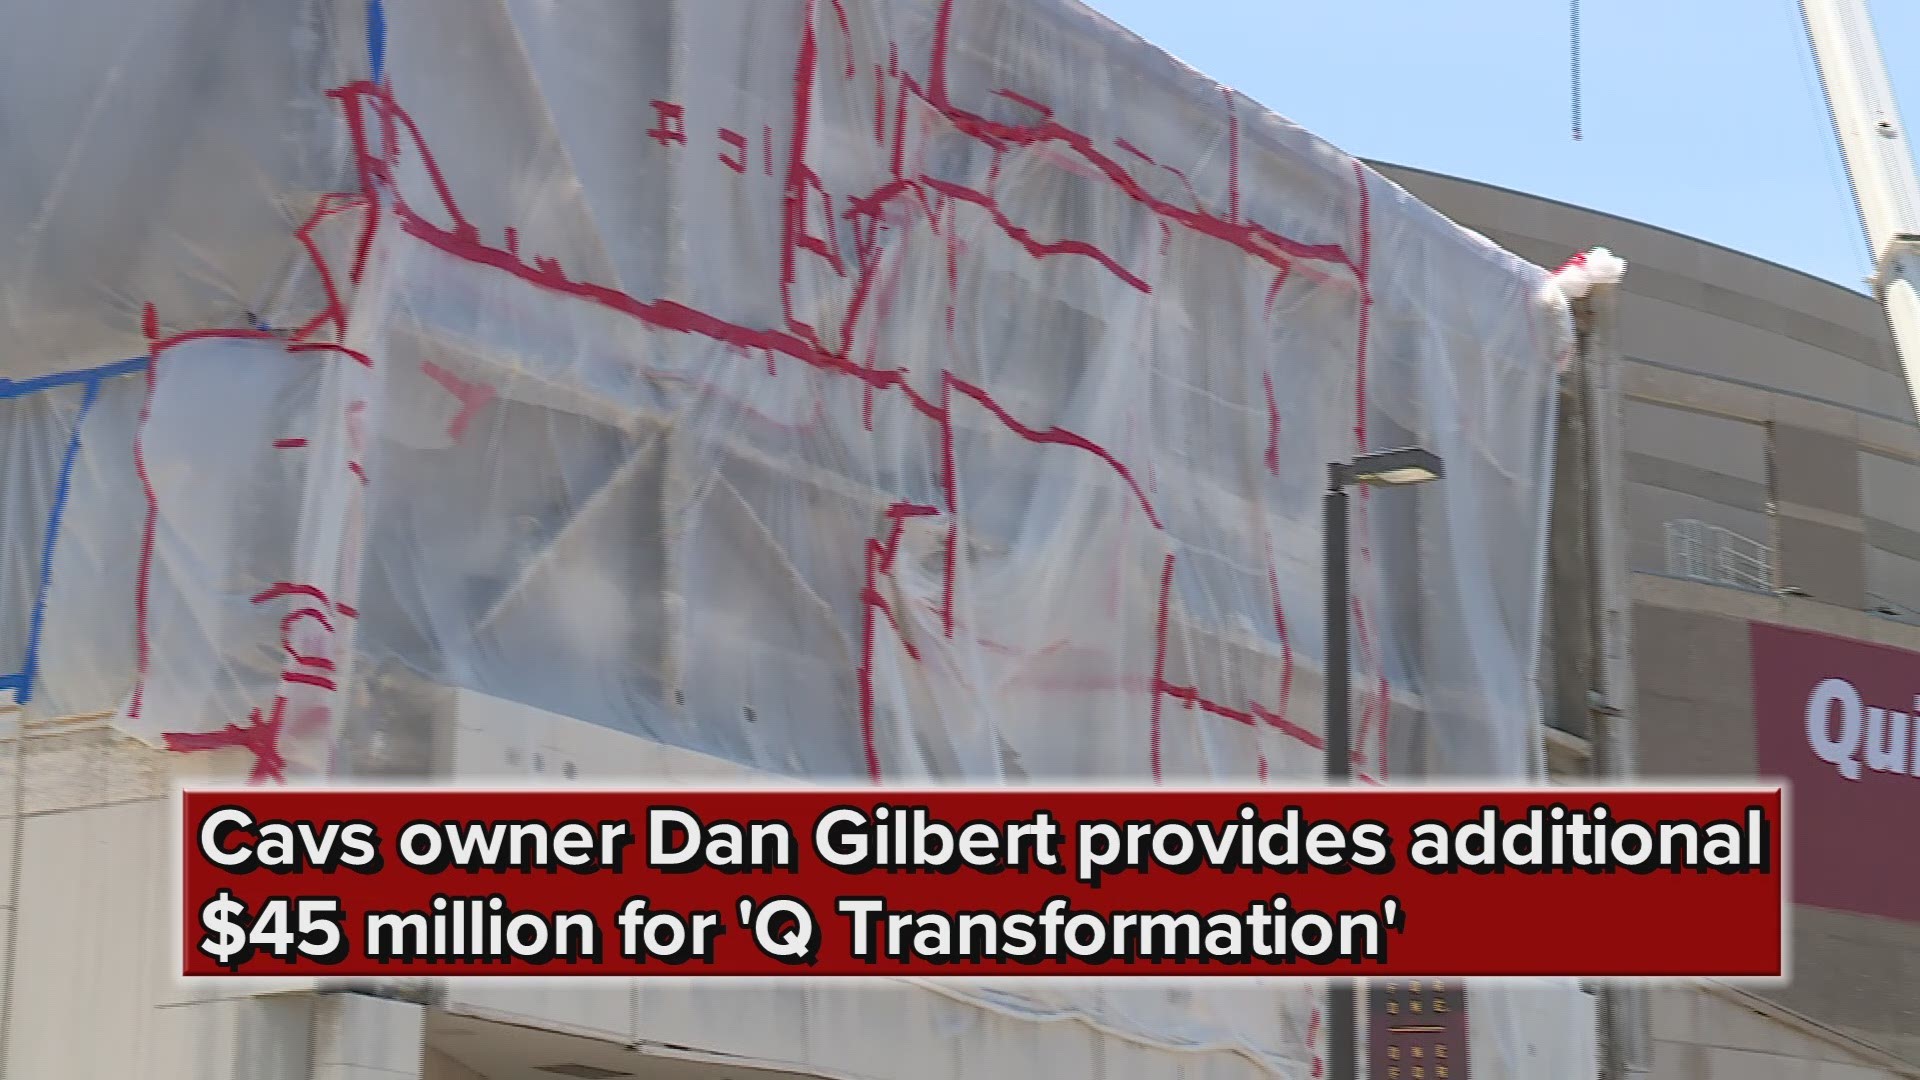 Cleveland Cavaliers owner Dan Gilbert provides additional $45 million for 'Q Transformation'